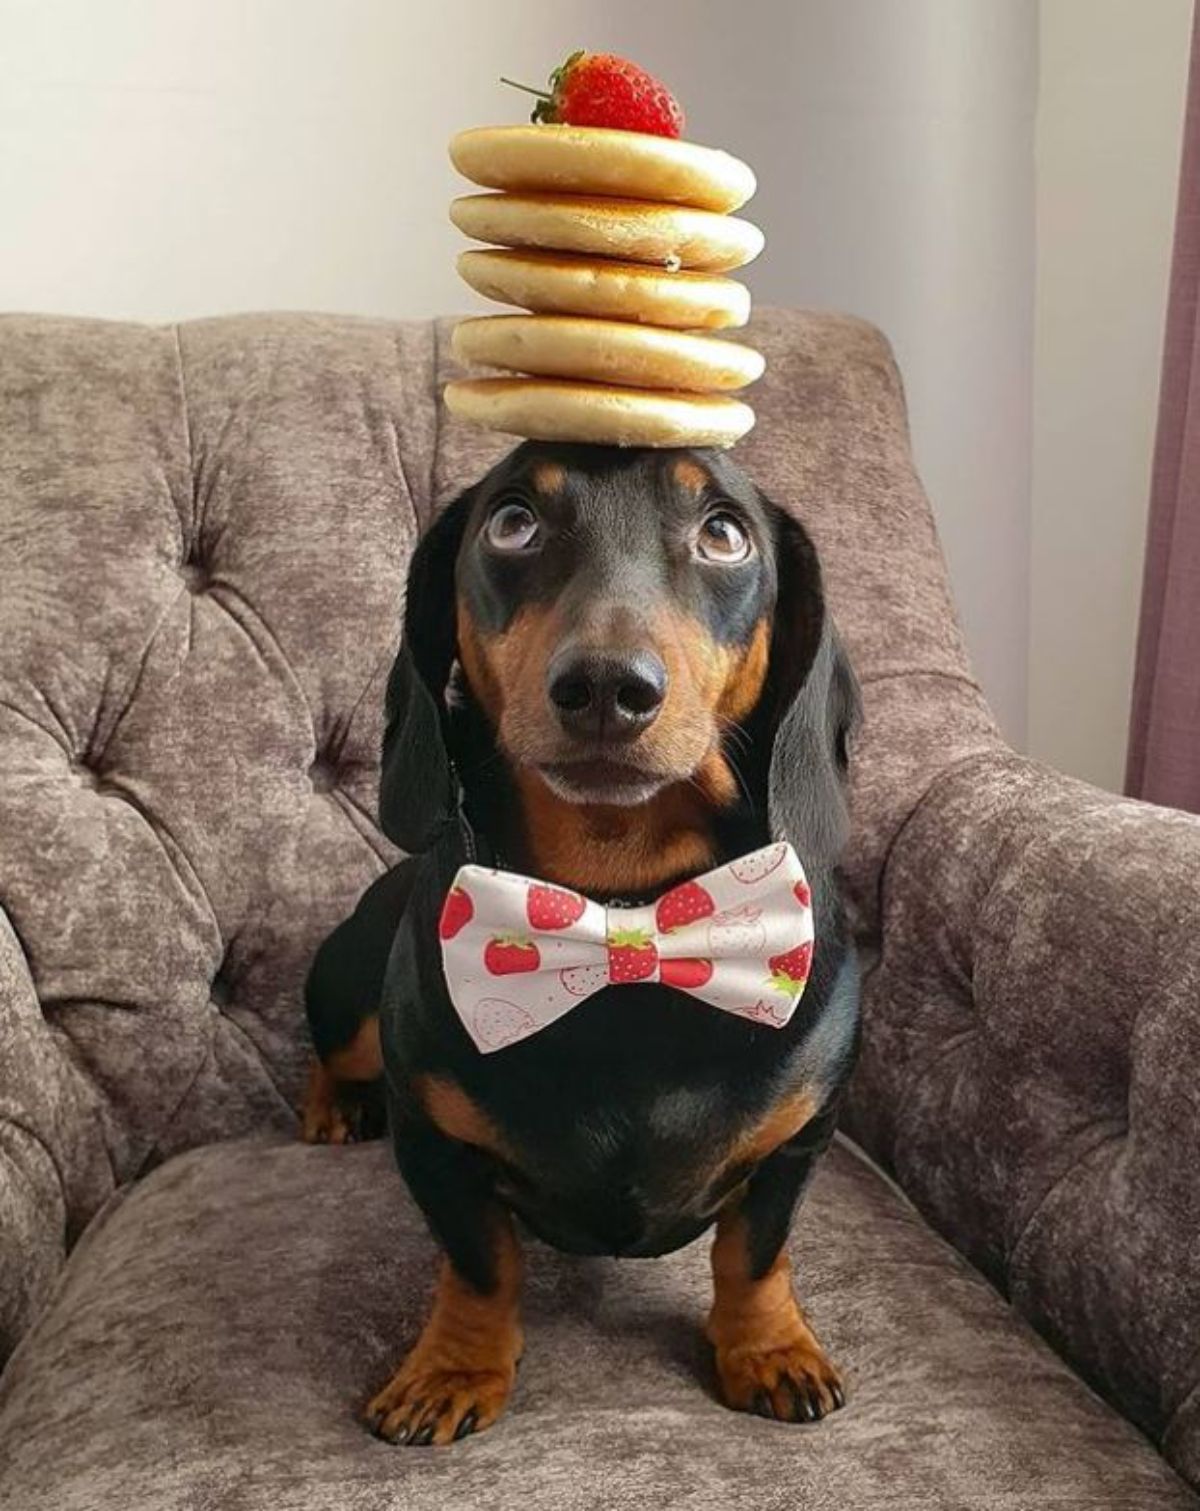 black and brown dachshund standing with 5 pancakes and a strawberry on top and wearing a red and white strawberry themed bowtie